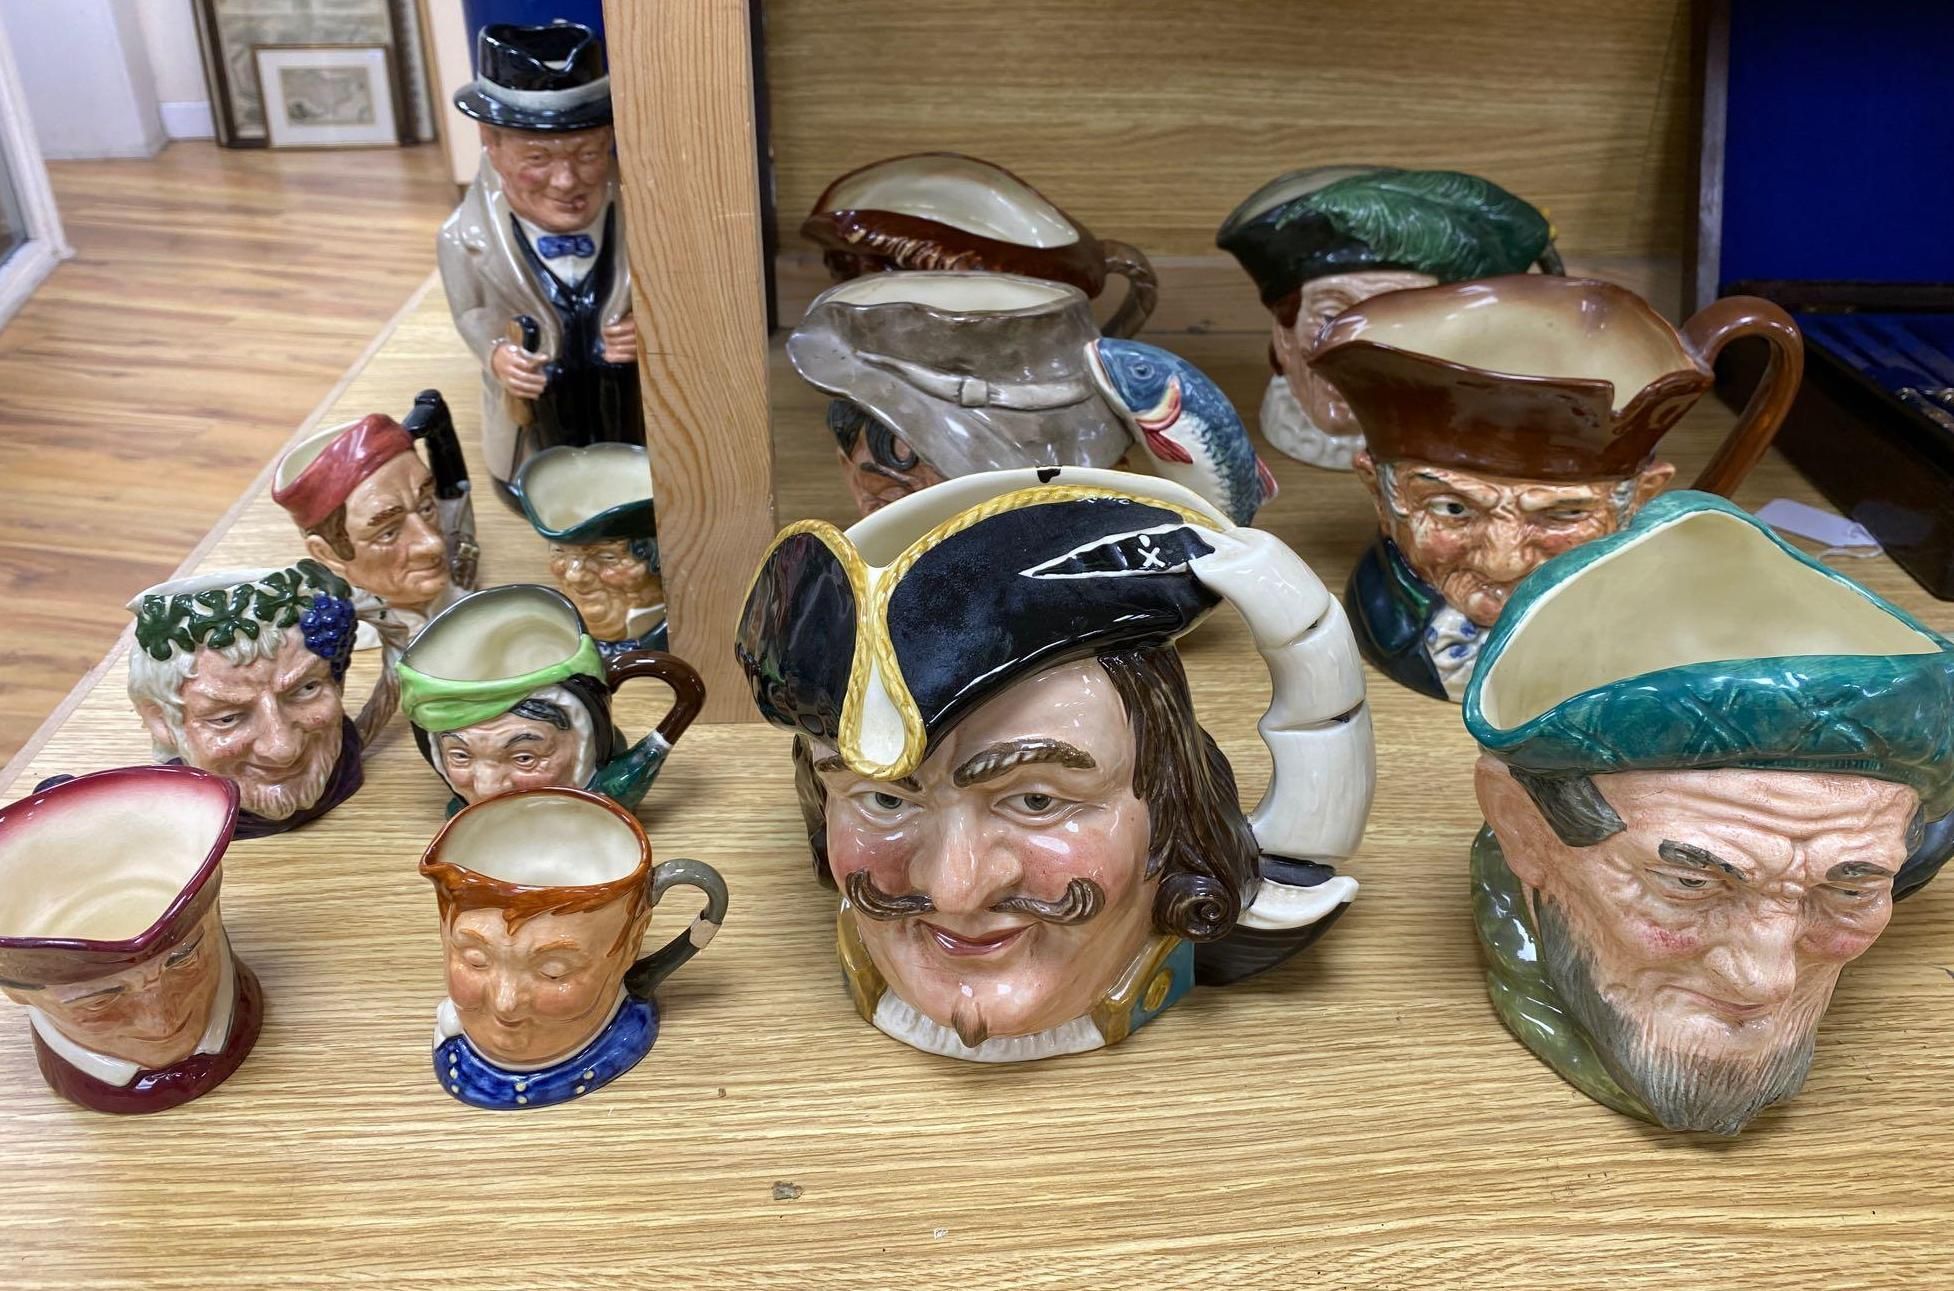 Twelve Royal Doulton character mugs and a Toby jug , Winston ChurchillCONDITION: Good condition